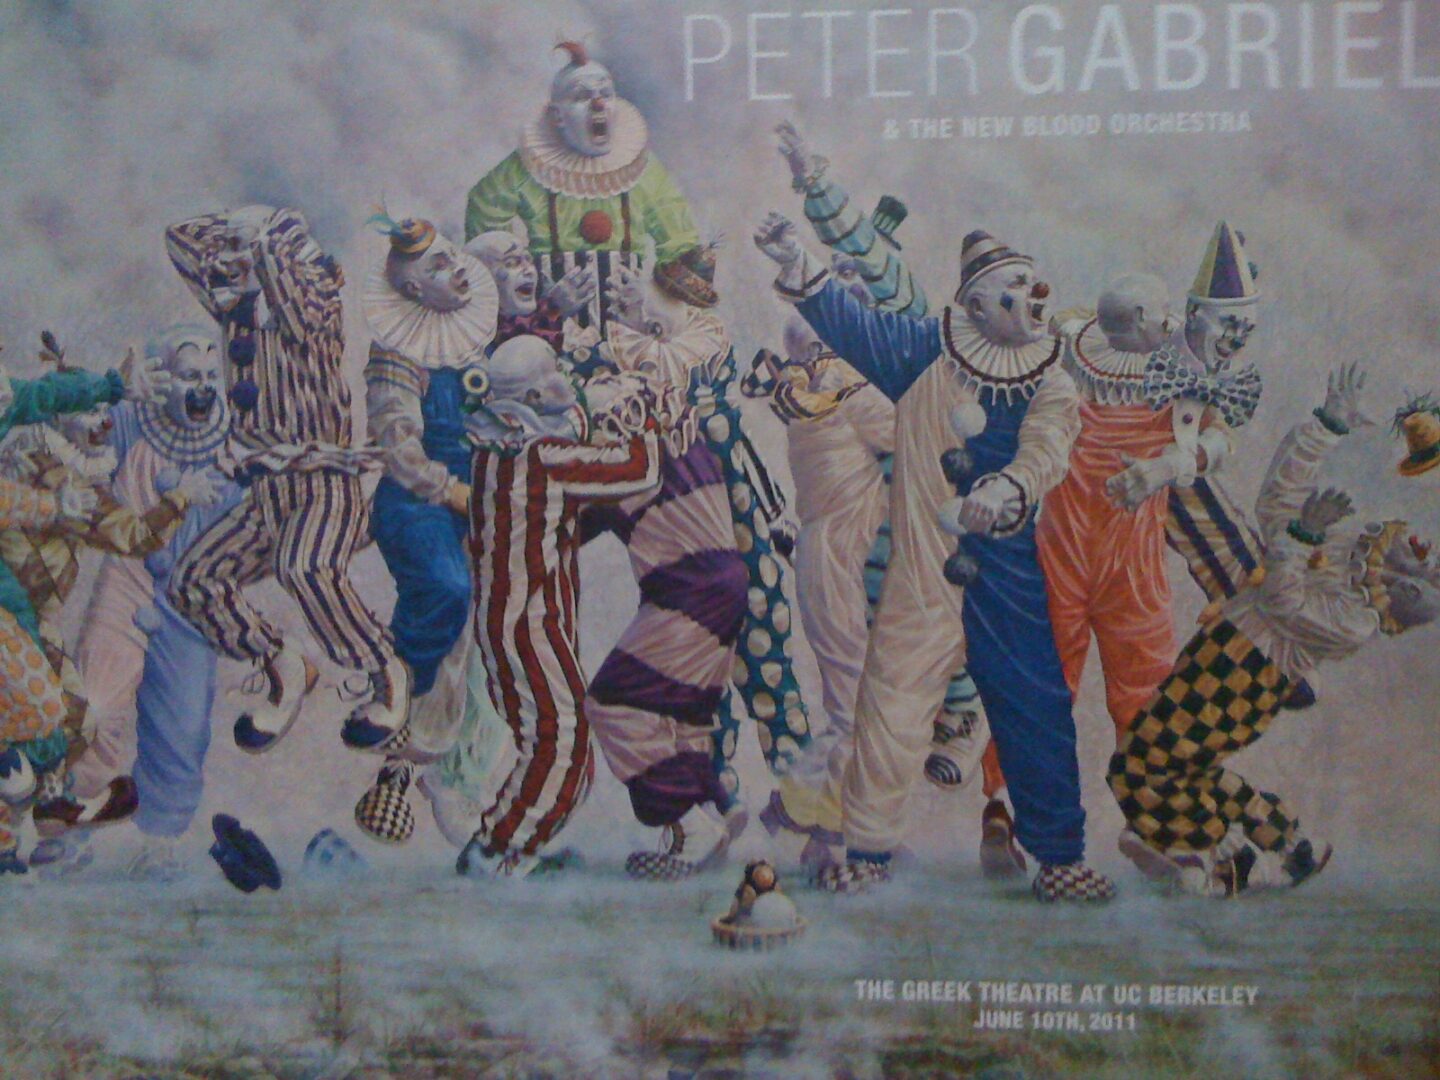 The cover of peter gabriel's clowns.